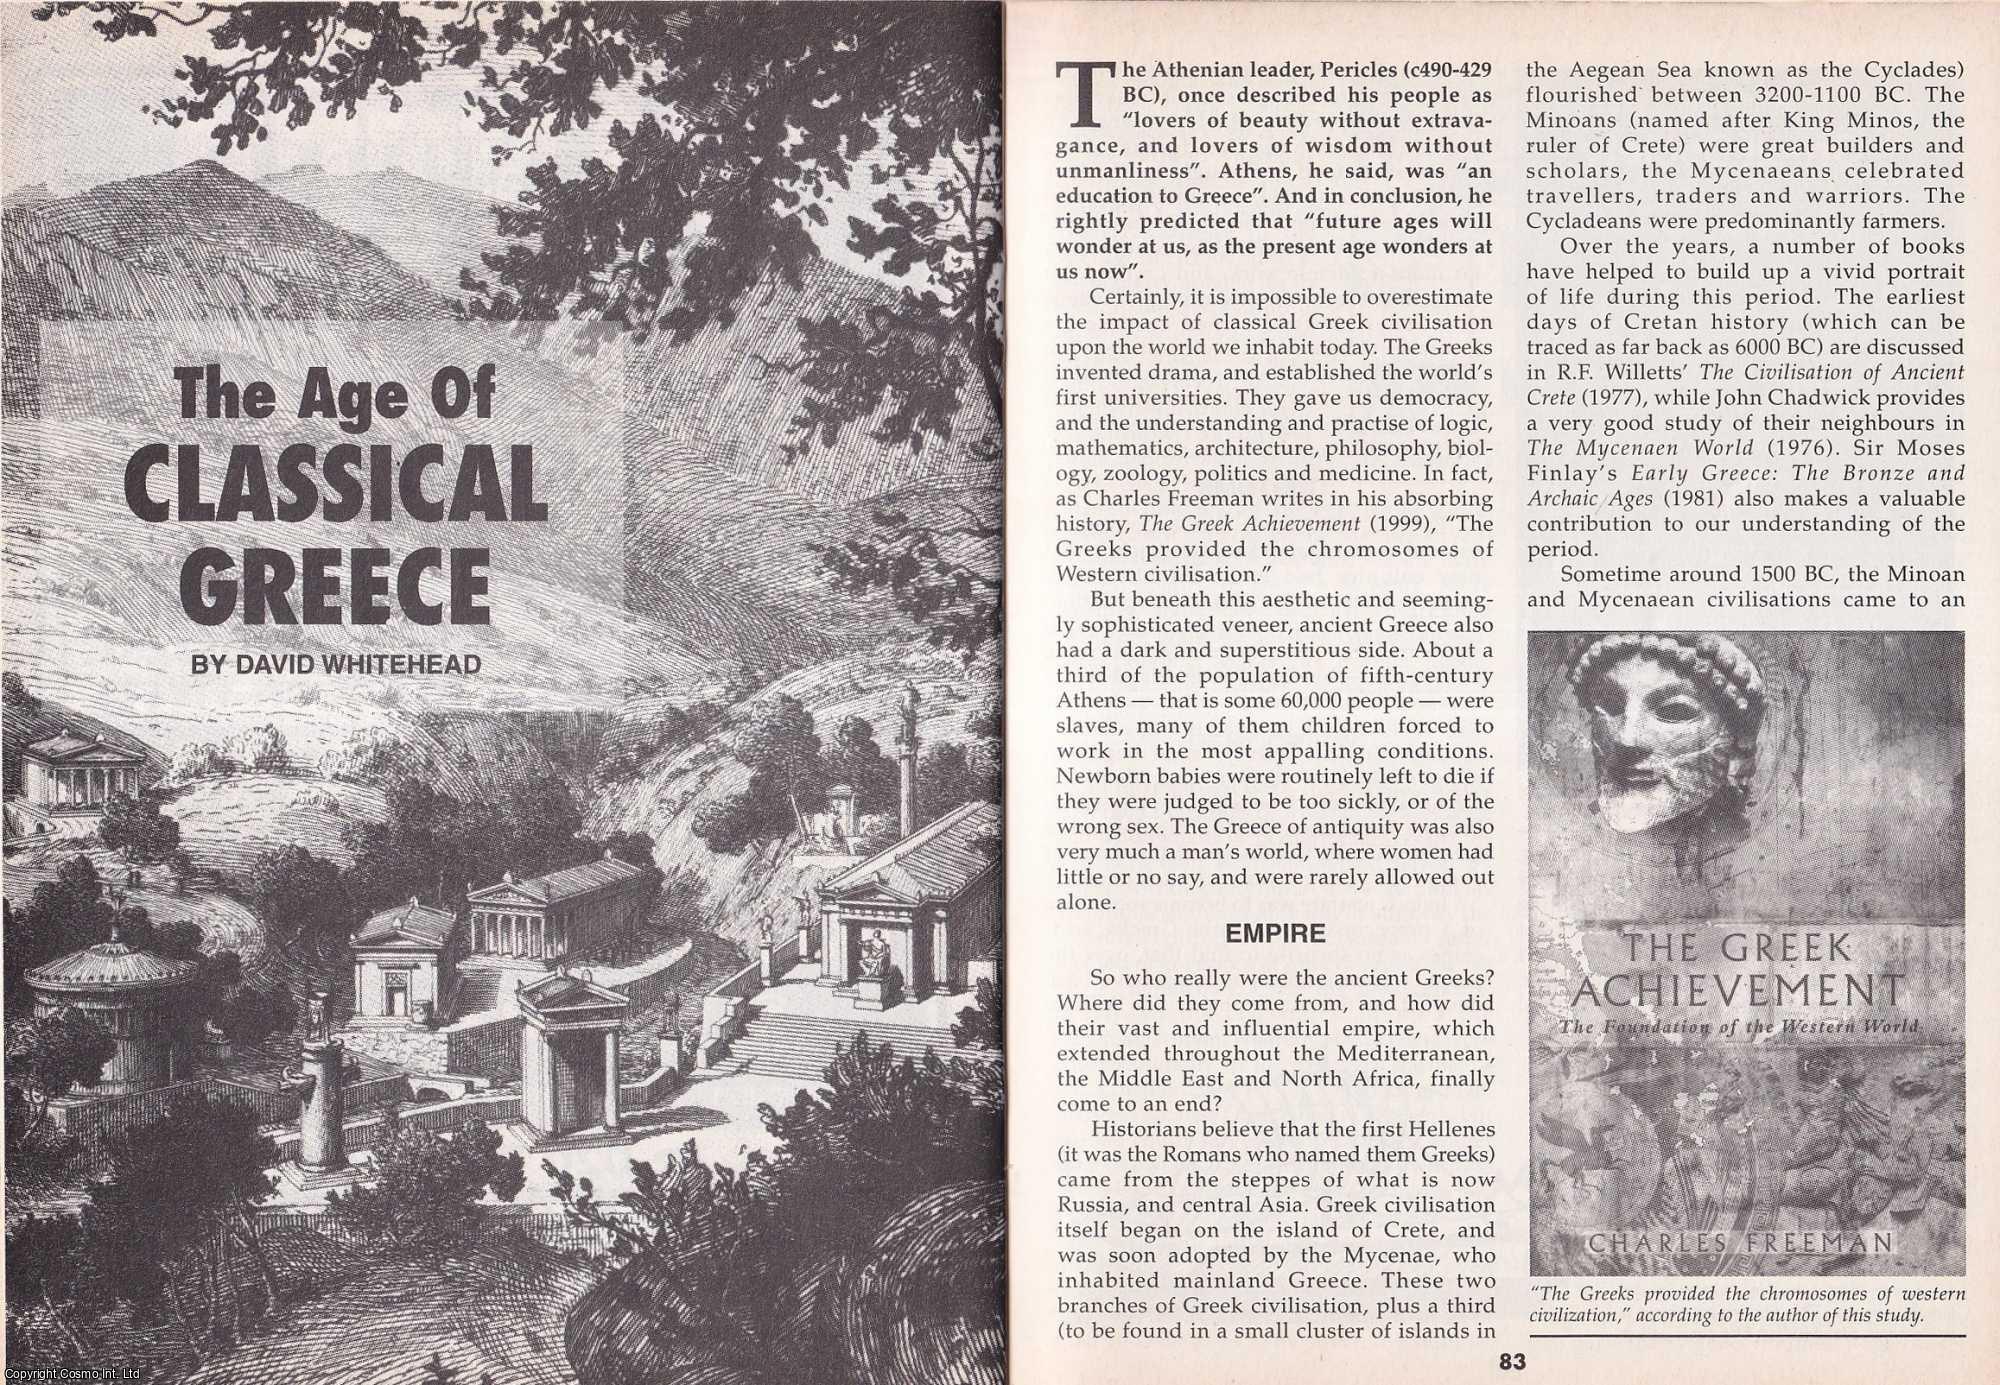 David Whitehead - The Age of Classical Greece. This is an original article separated from an issue of The Book & Magazine Collector publication.